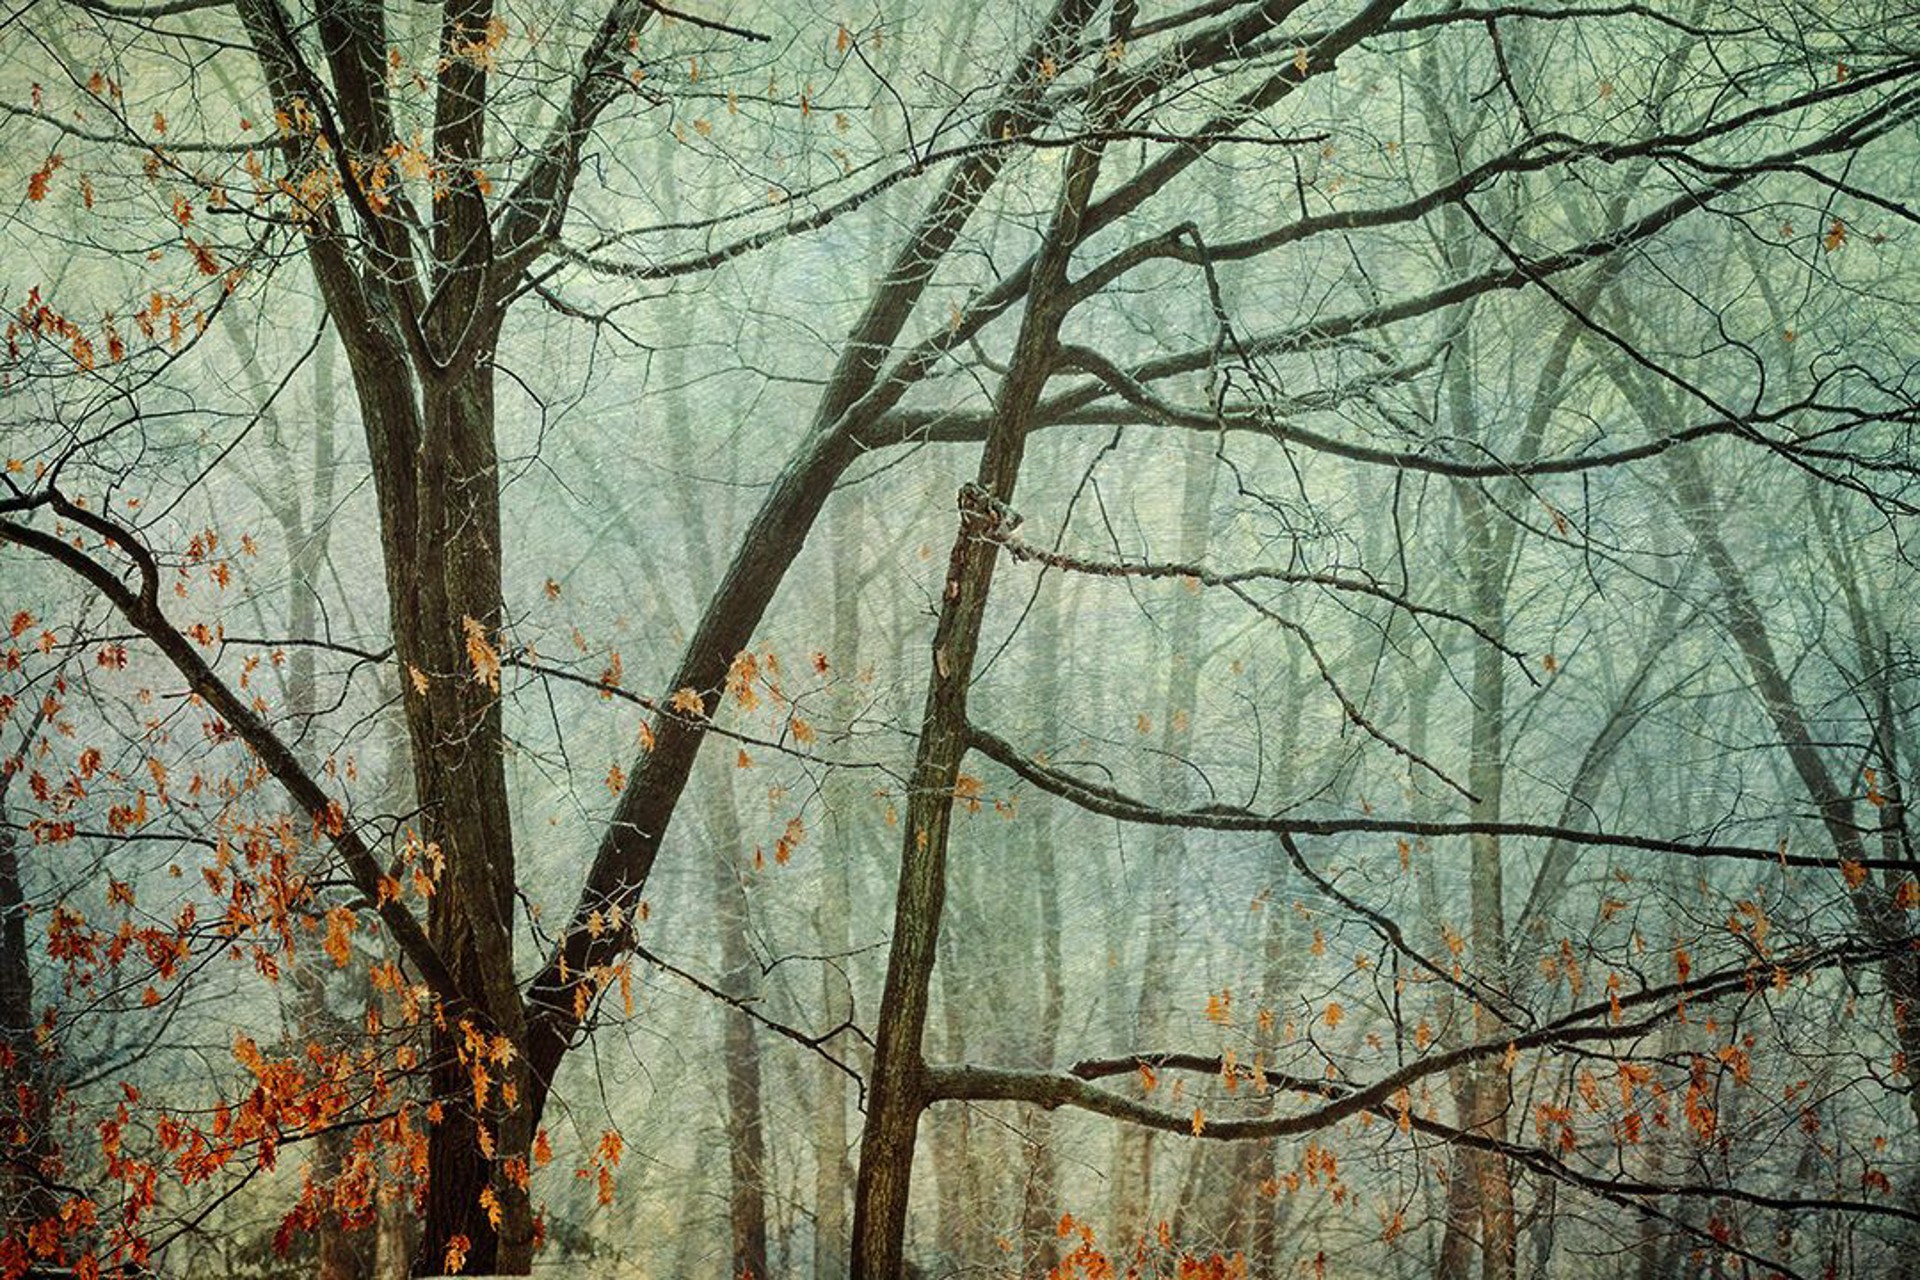 Freezing Rain in the Woodland by Jim Sincock